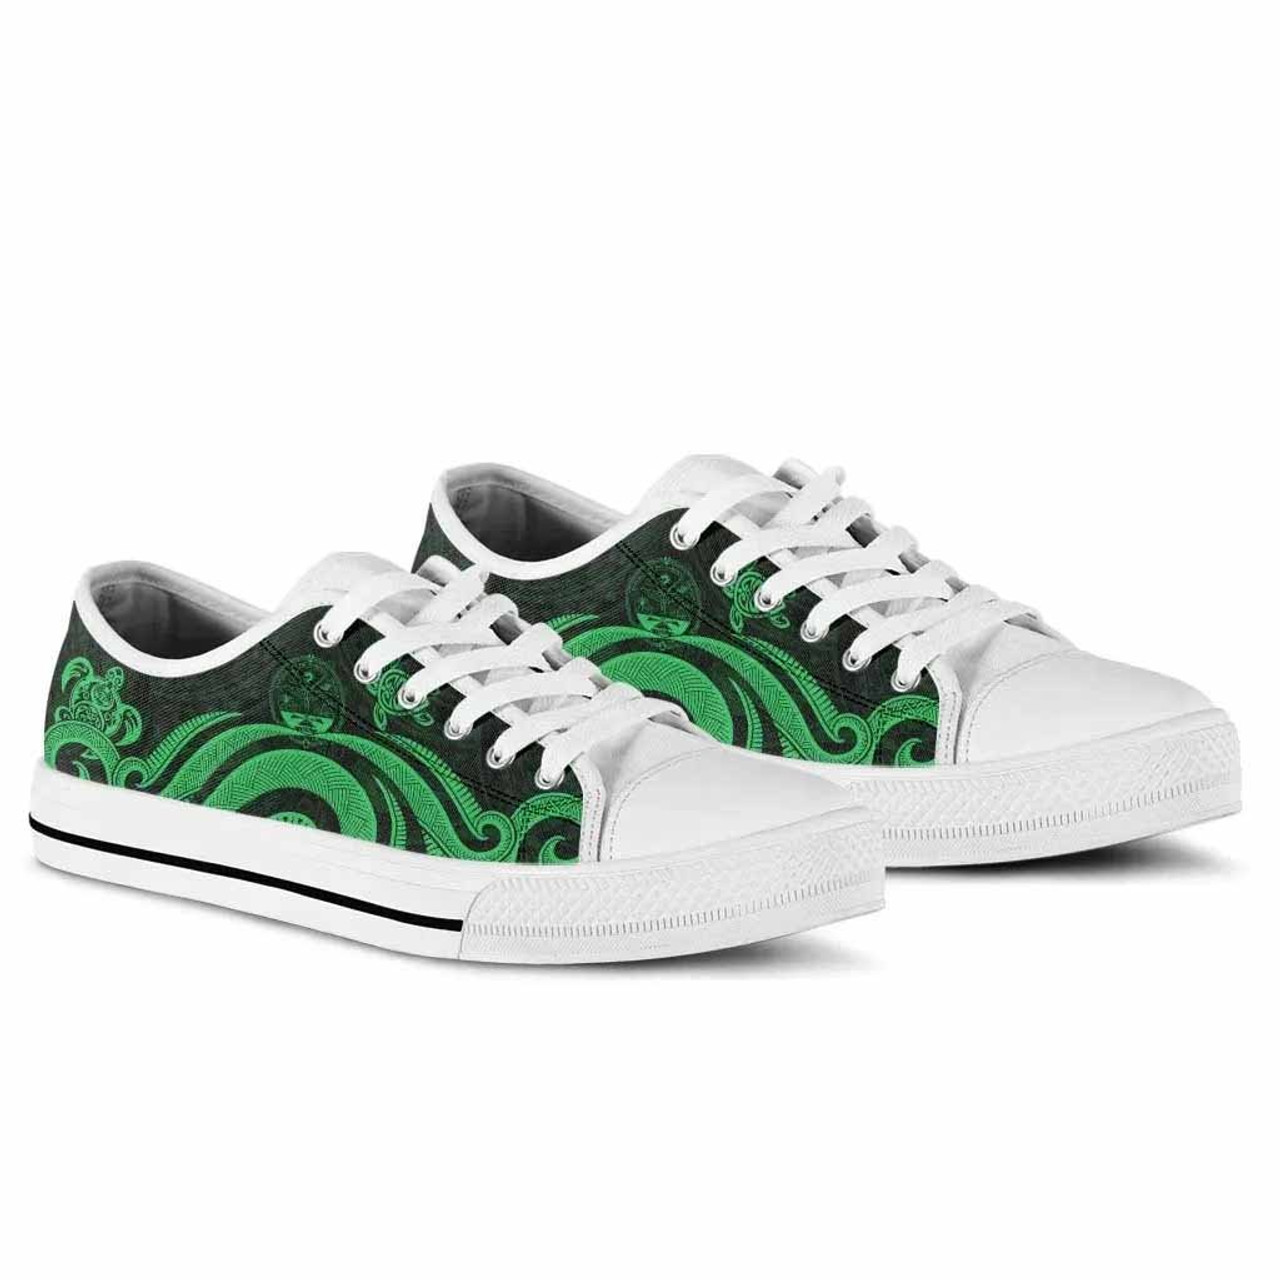 Marshall Islands Low Top Canvas Shoes - Green Tentacle Turtle Crest 6